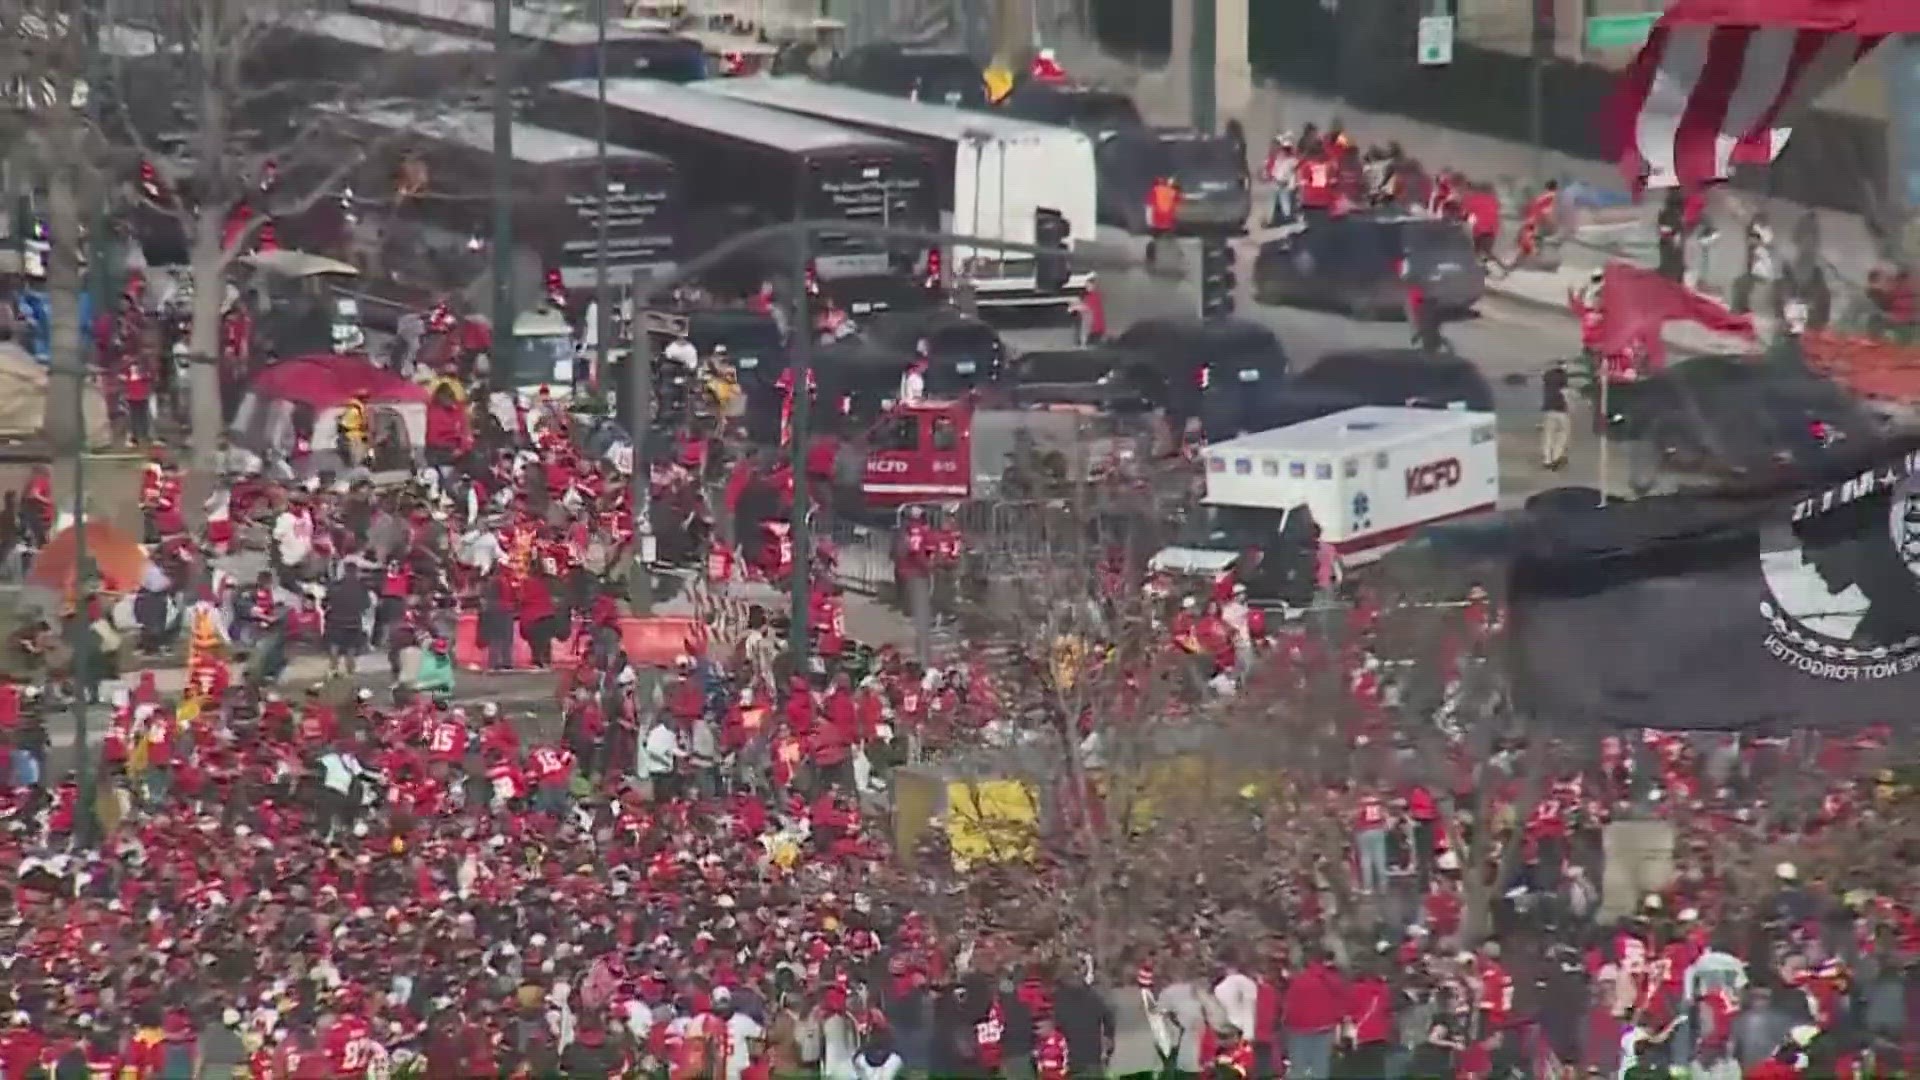 One person is dead and several more injured after a shooting at the end of the Kansas City Chiefs’ Super Bowl parade that sent terrified fans running for cover.